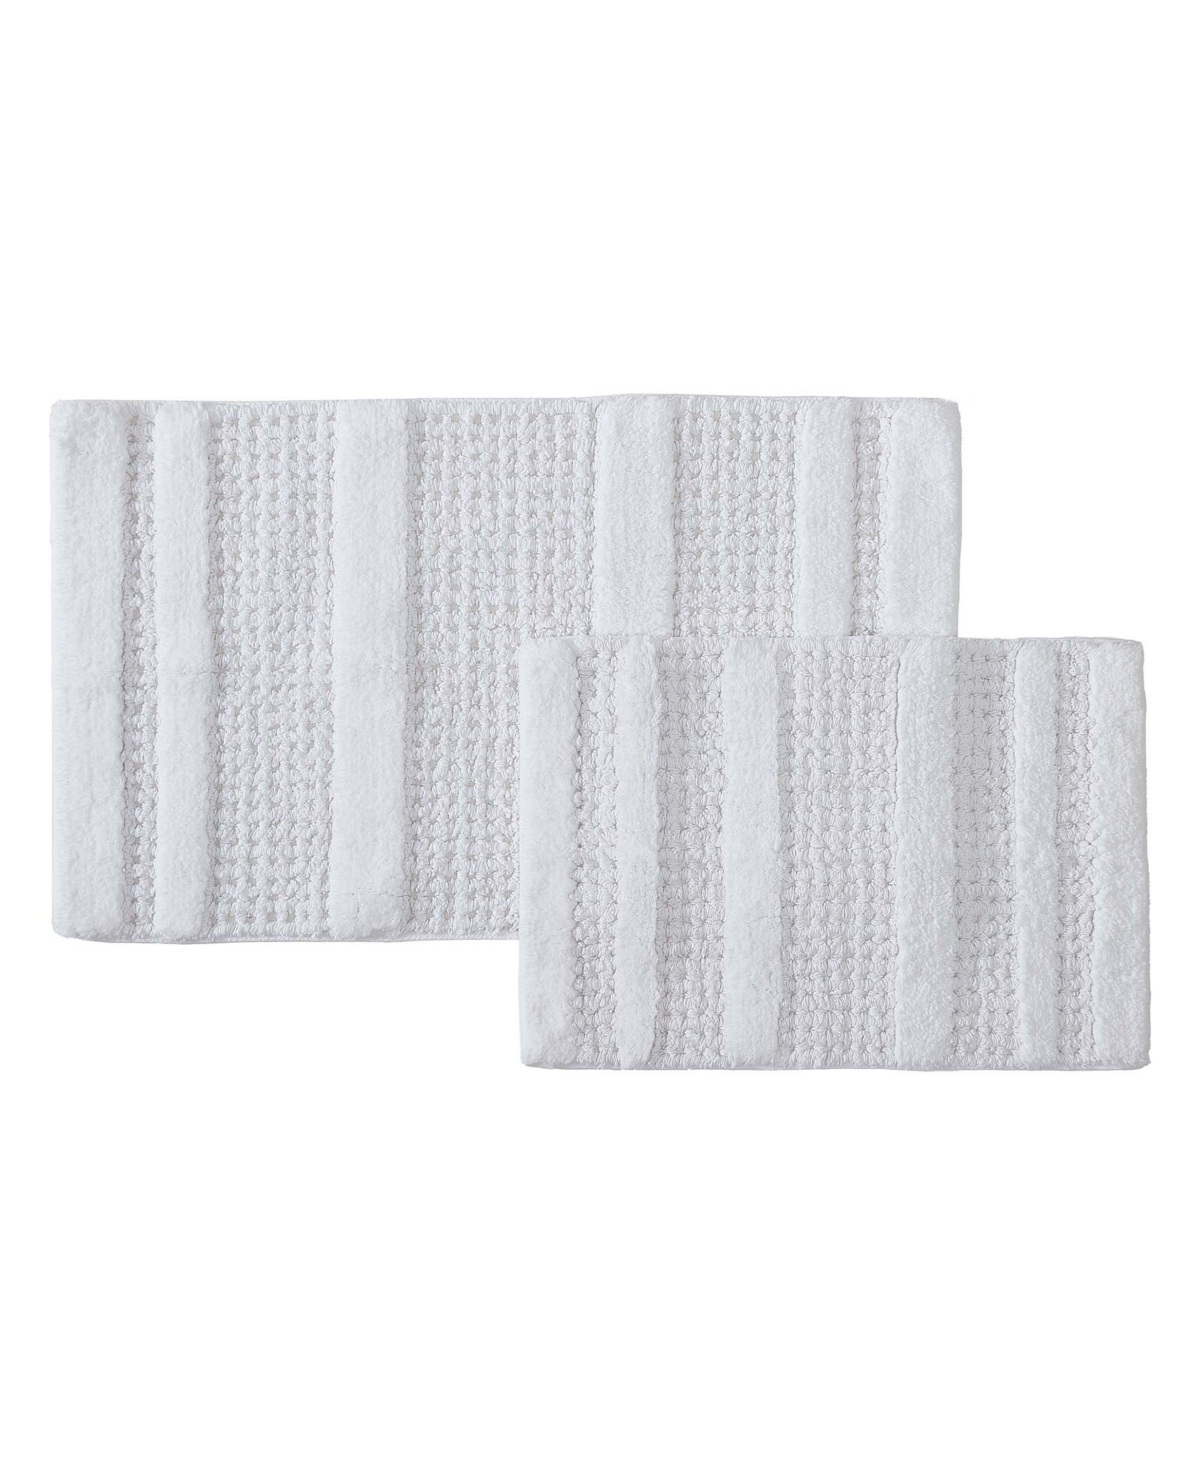 Kenneth Cole Reaction Waffle Cotton Tufted 2 Piece Bath Rug Set In White